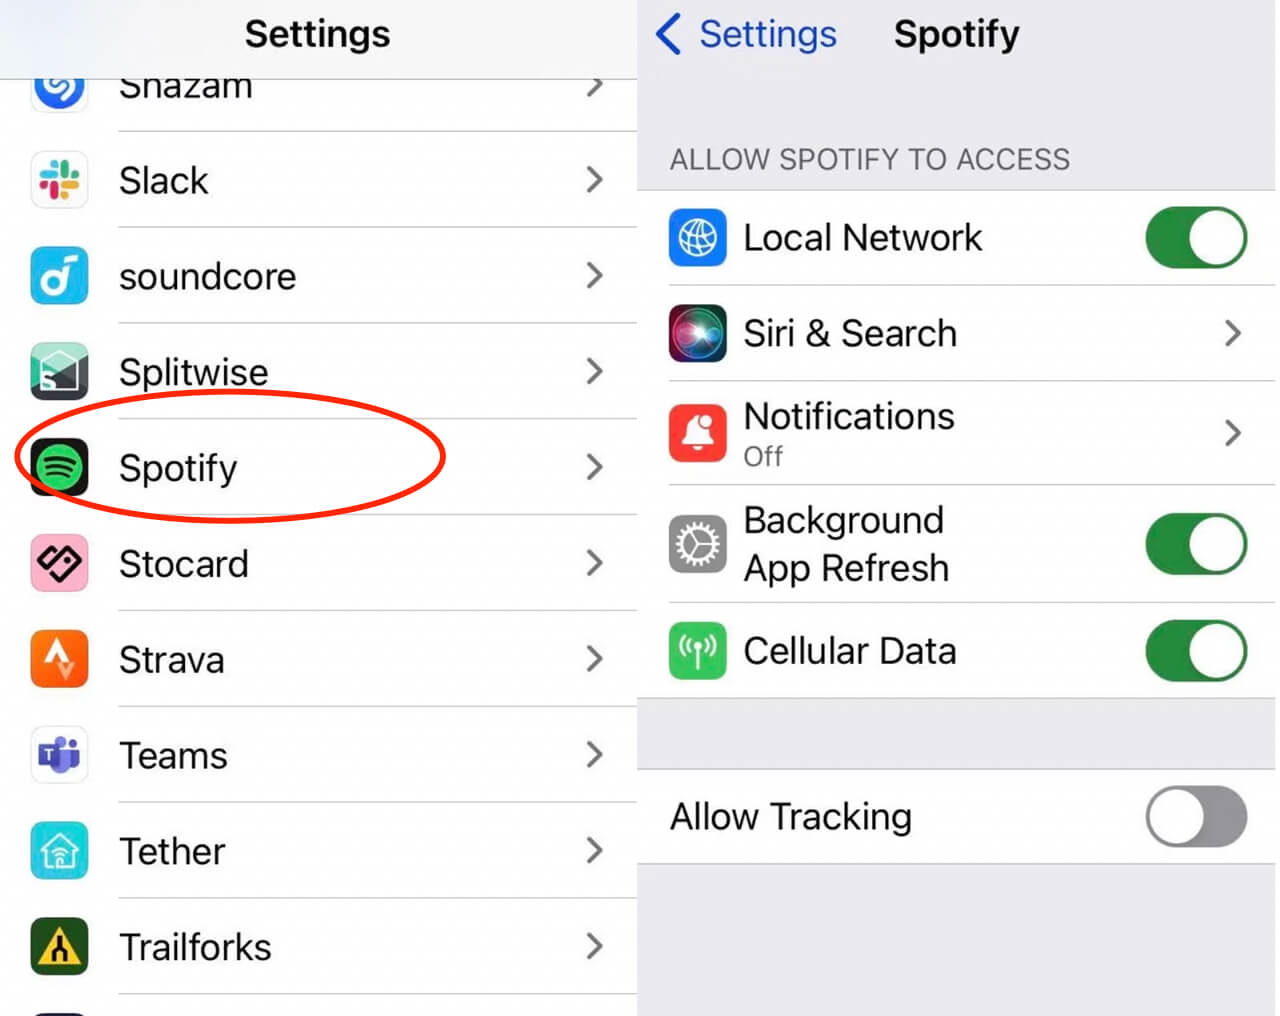  Spotify-no-internet-connection-enable-data-iphone  